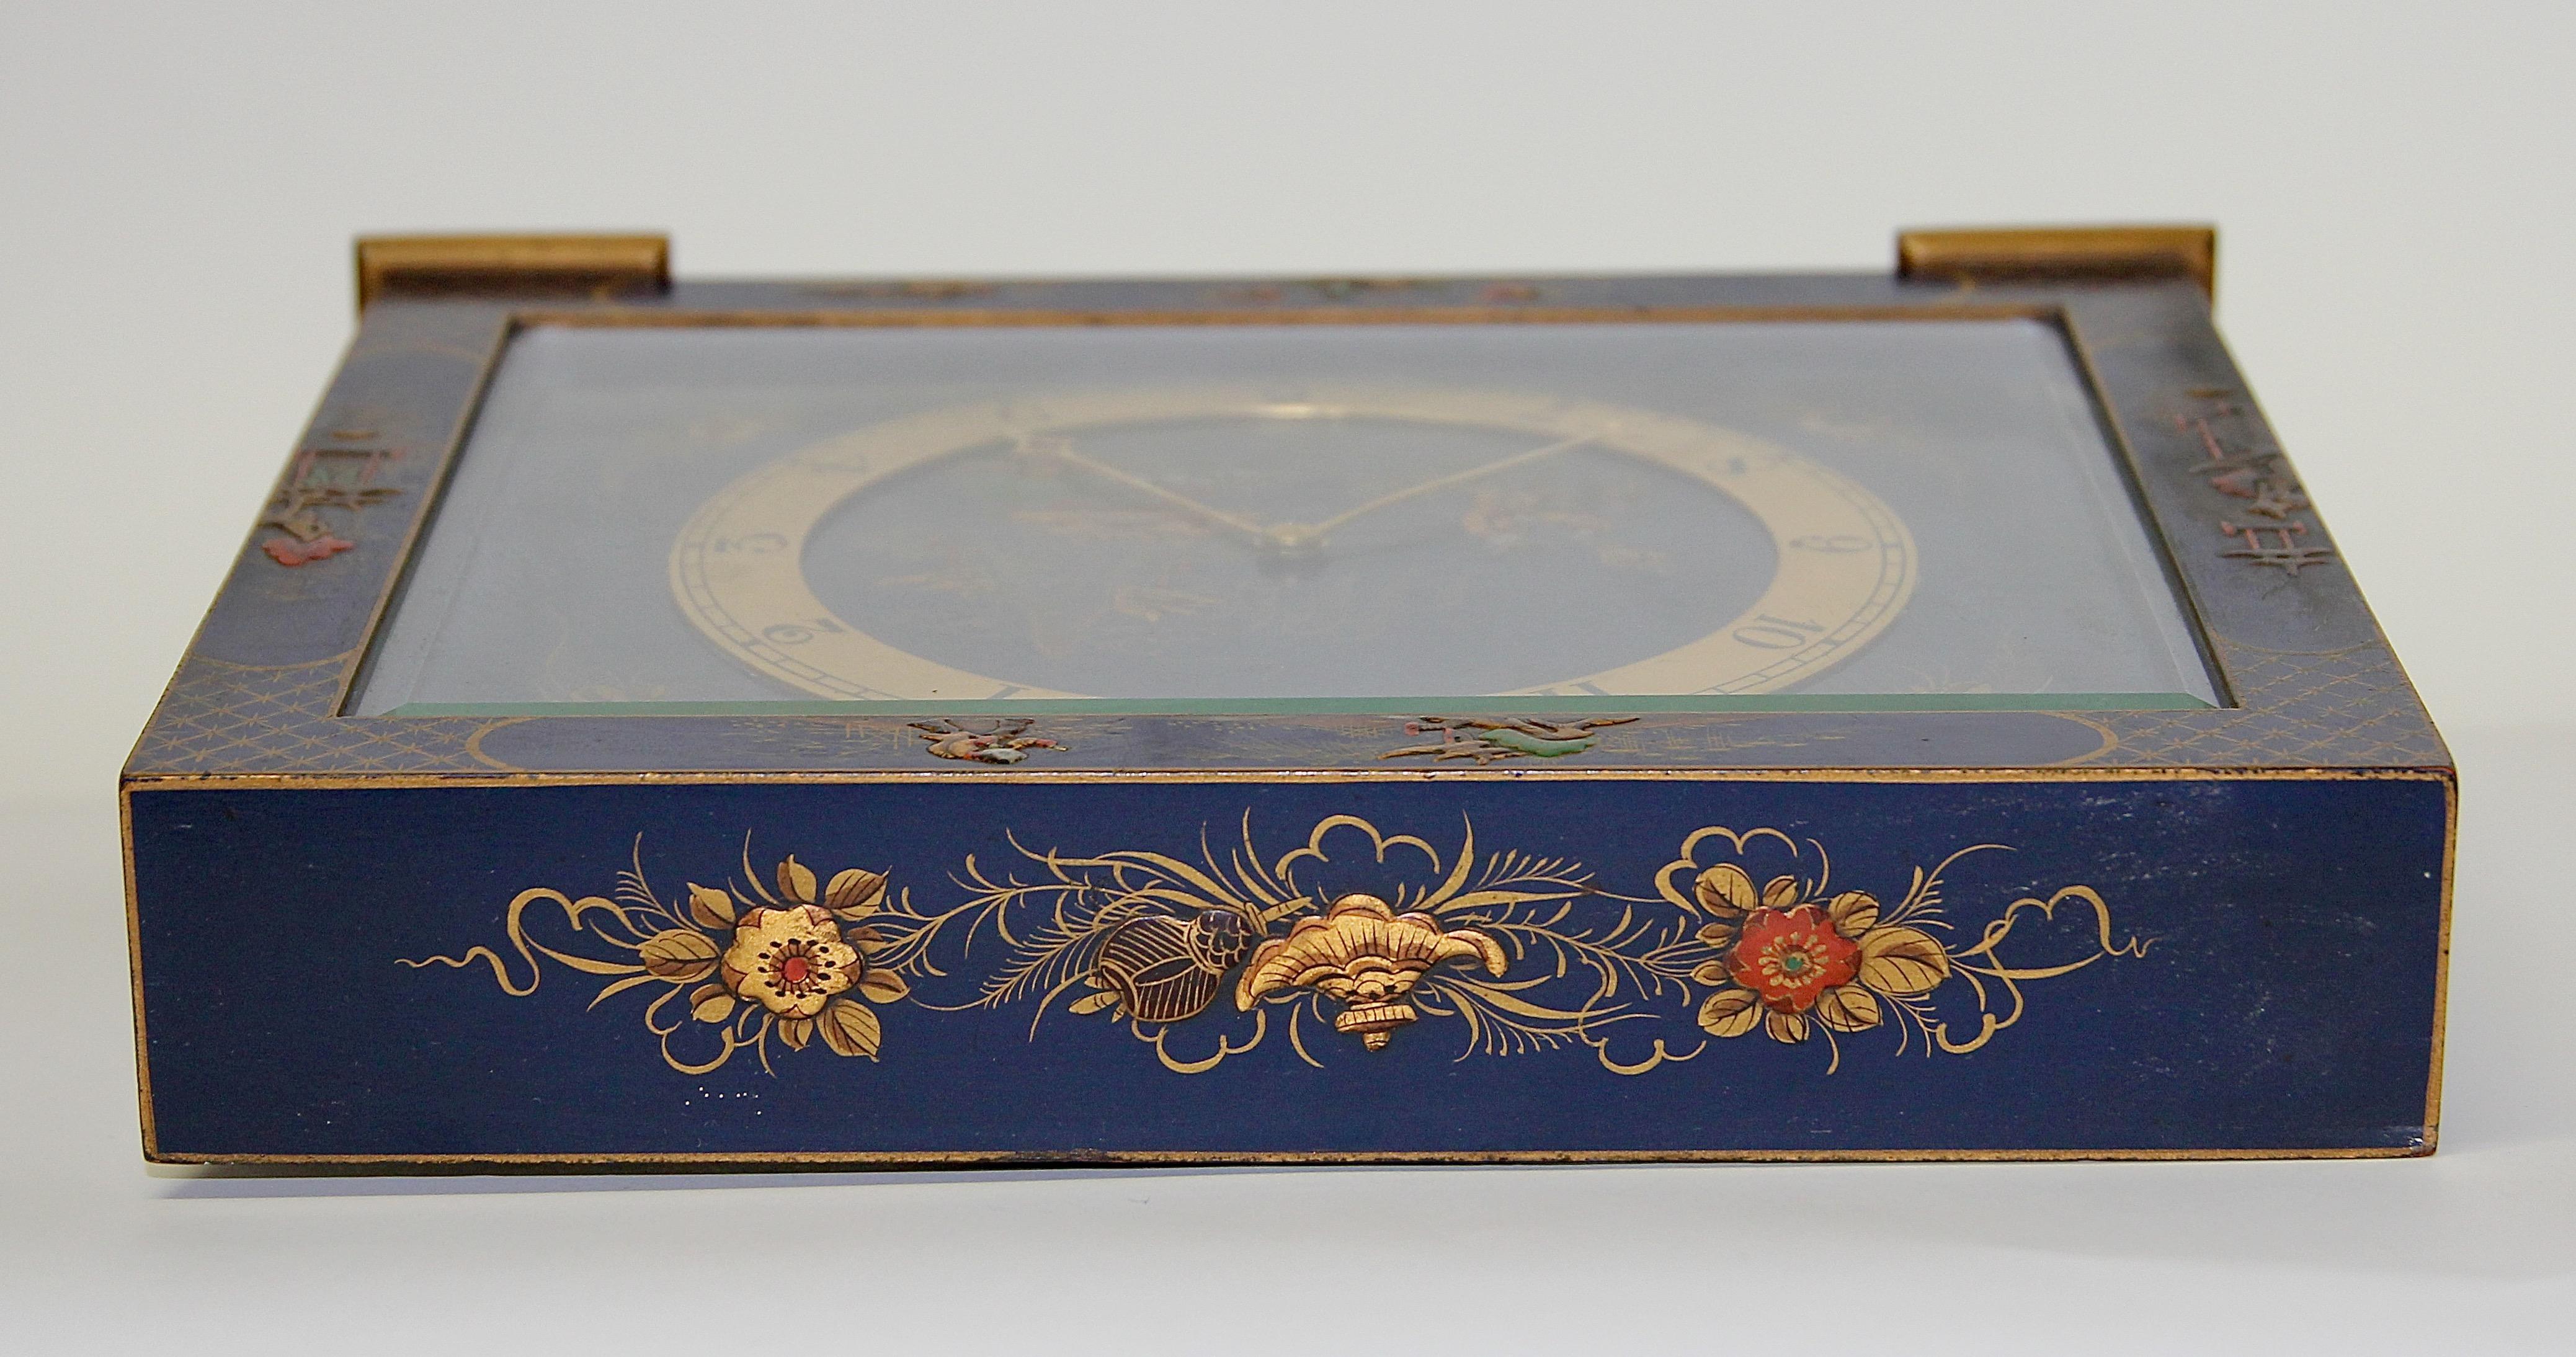 Antique Table Desk Clock, Painted, Chinoiserie, China Art For Sale 3